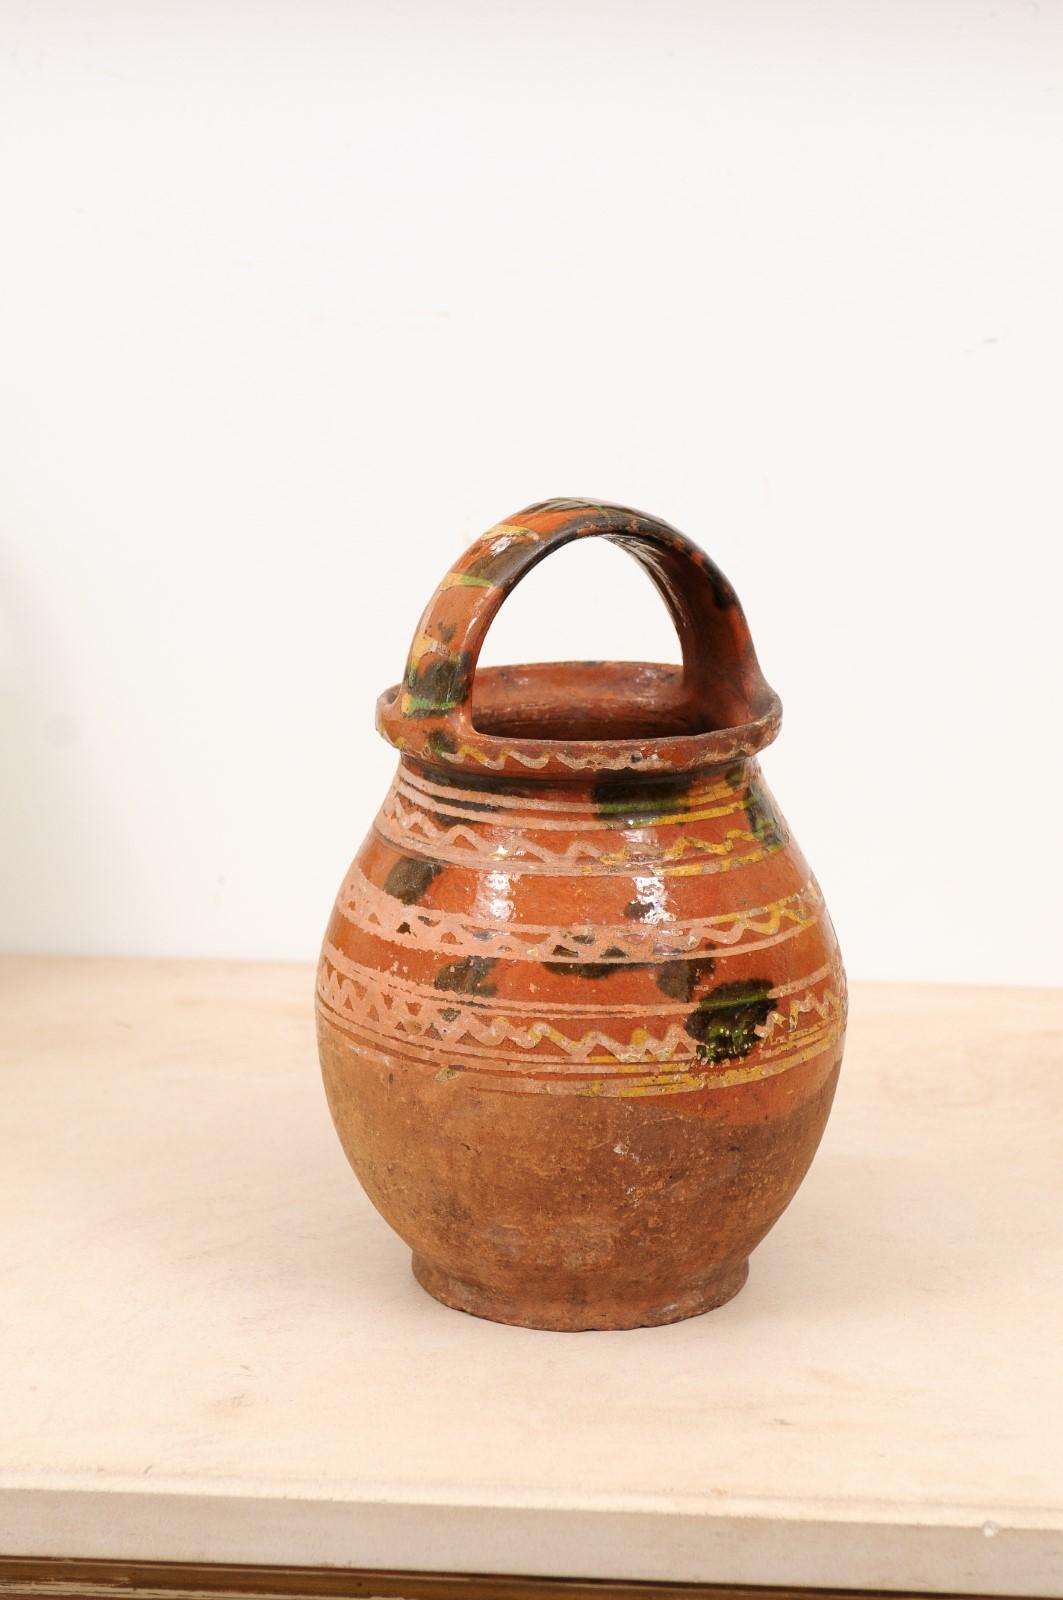 A rustic French pottery jug from the late 19th century, with wavy lines and large handle. Created in France at the end of the 19th century, this pottery jug features a rusty brown glazed ground adorned with yellow and cream wavy lines and blotched